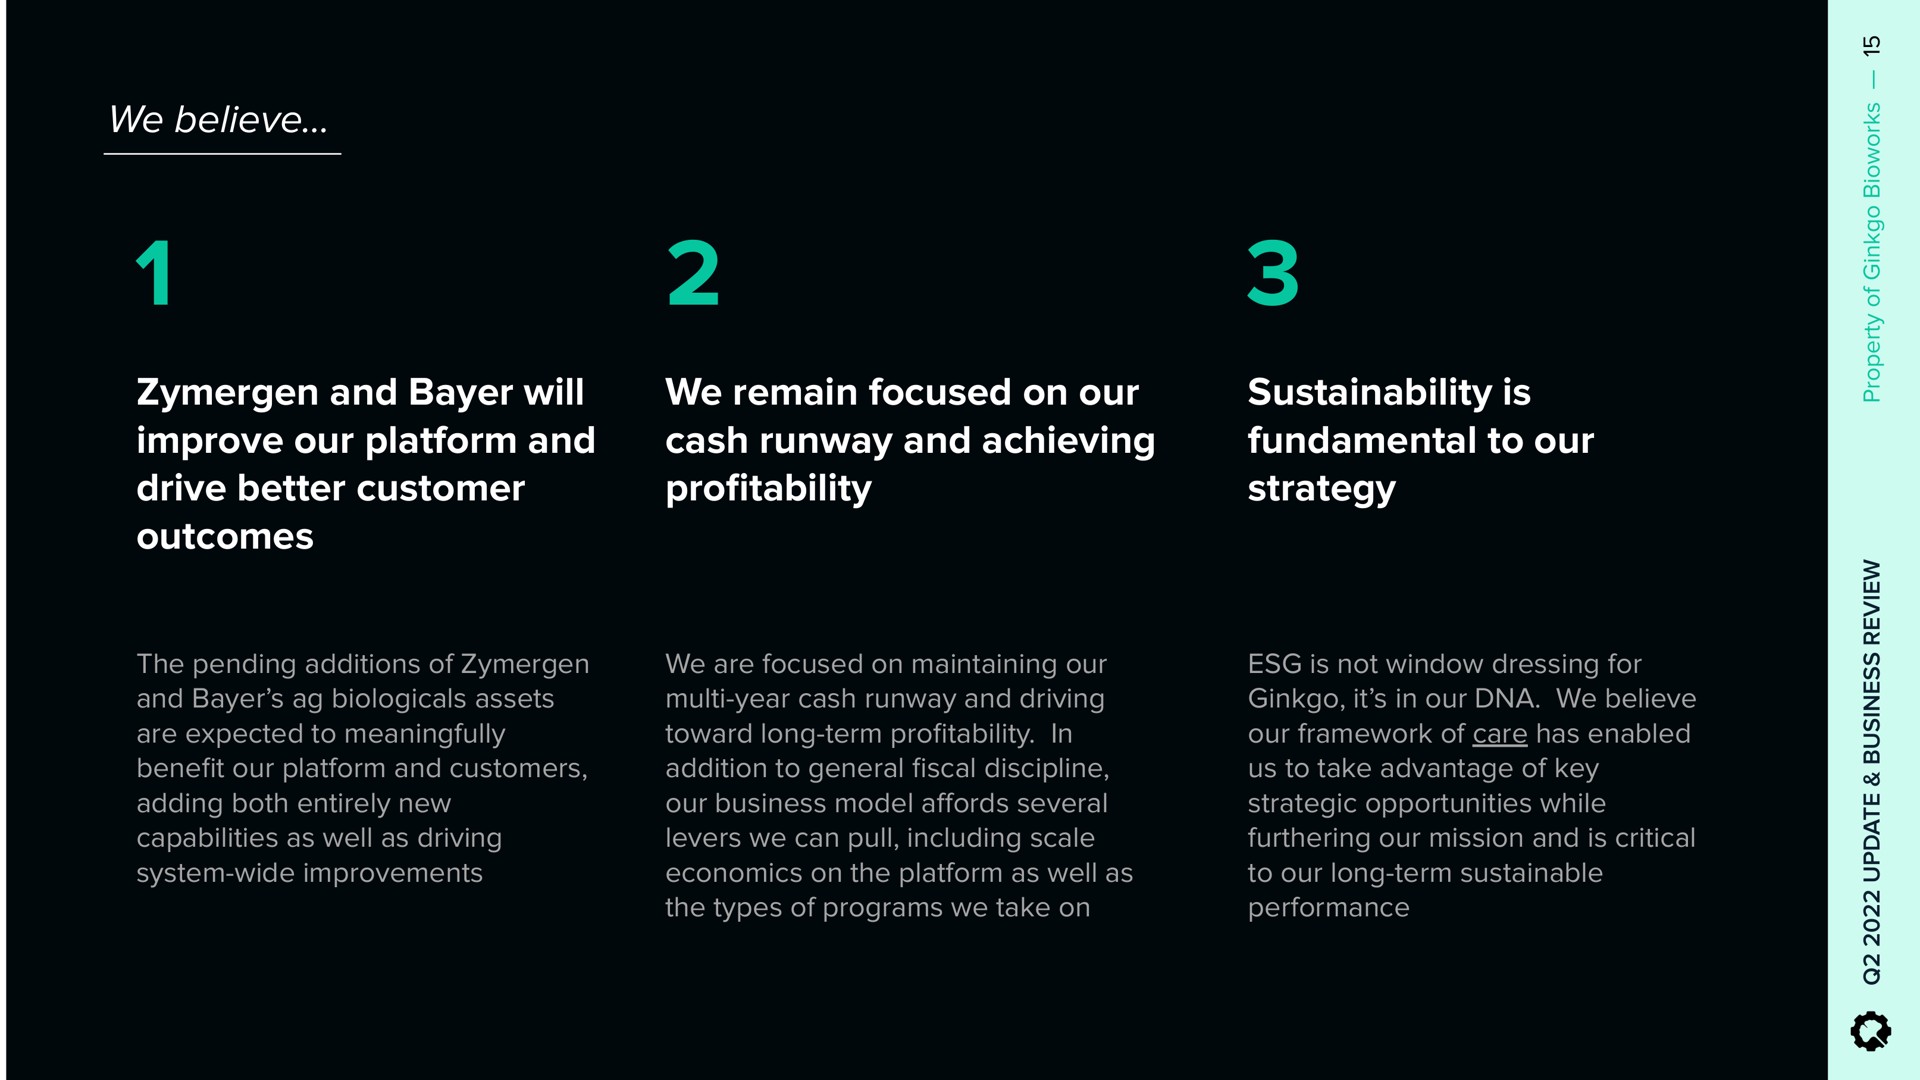 we believe and will improve our platform and drive better customer outcomes we remain focused on our cash runway and achieving pro is fundamental to our strategy profitability | Ginkgo